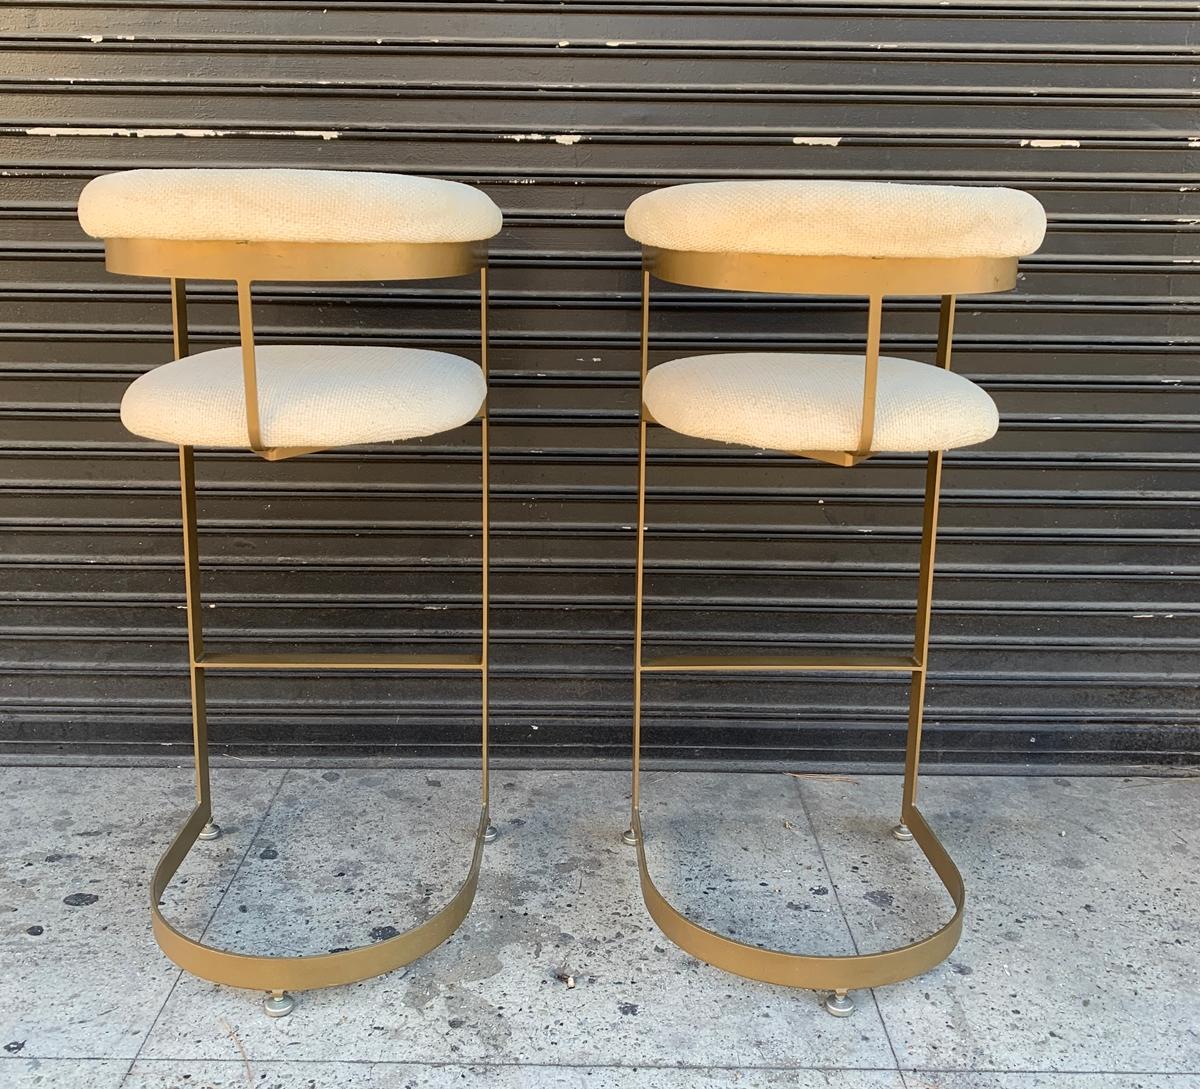 American Pair of Cantilever Barstools with Metal Frames